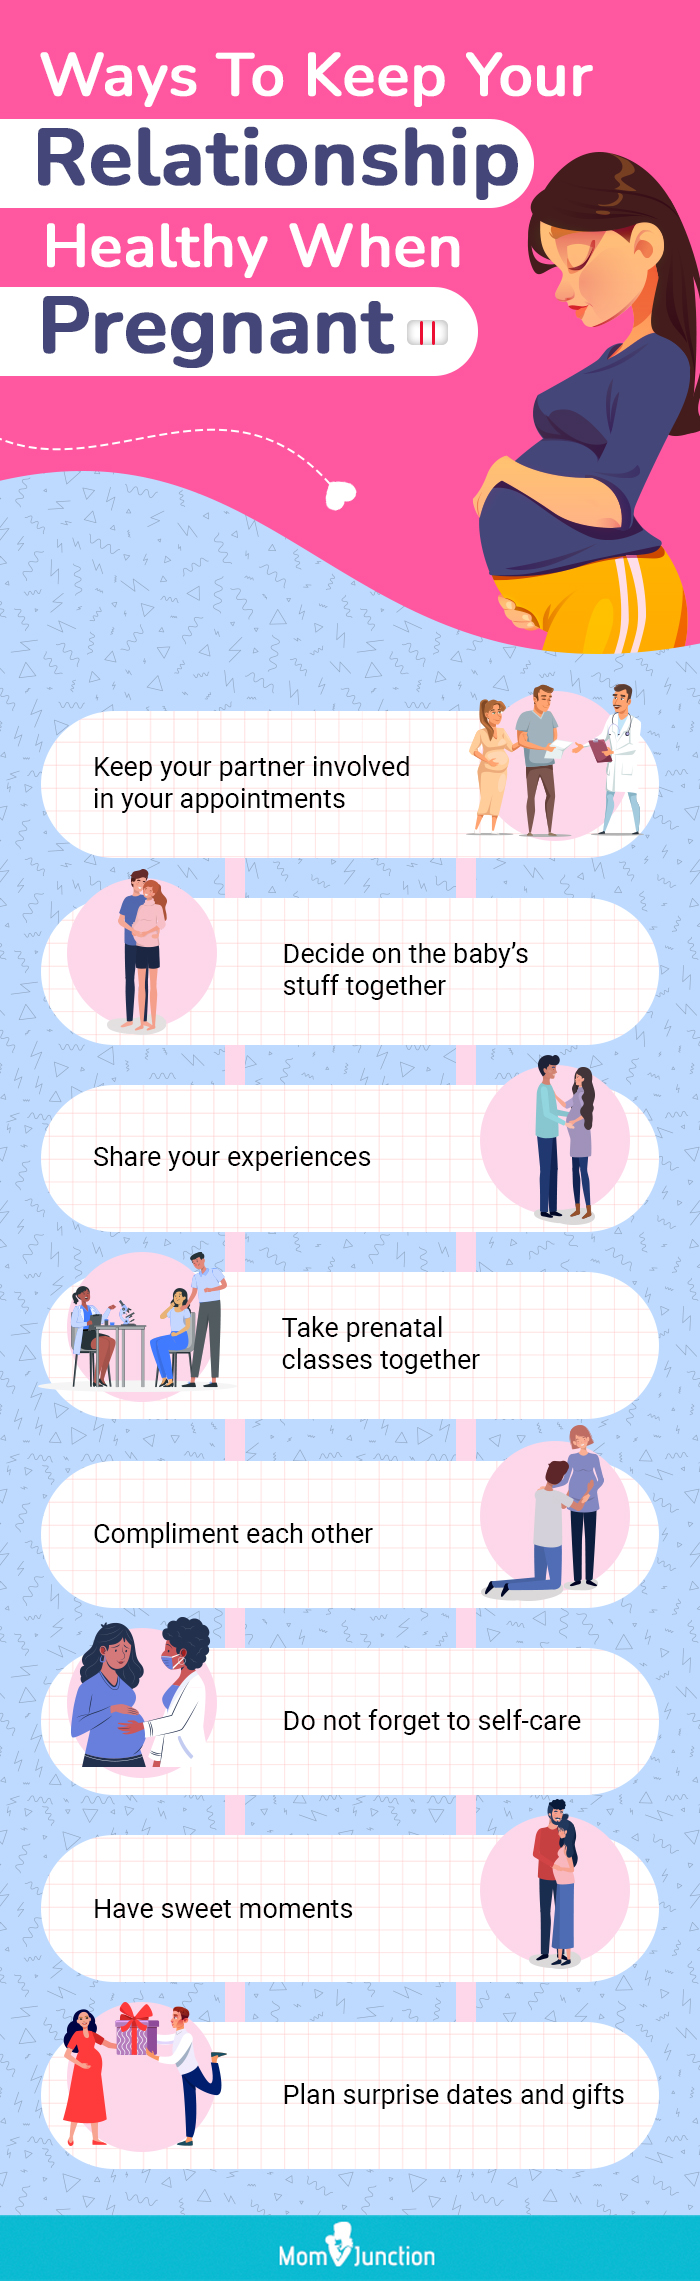 Wife And Husband Relationship In Pregnancy Tips To Maintain It image